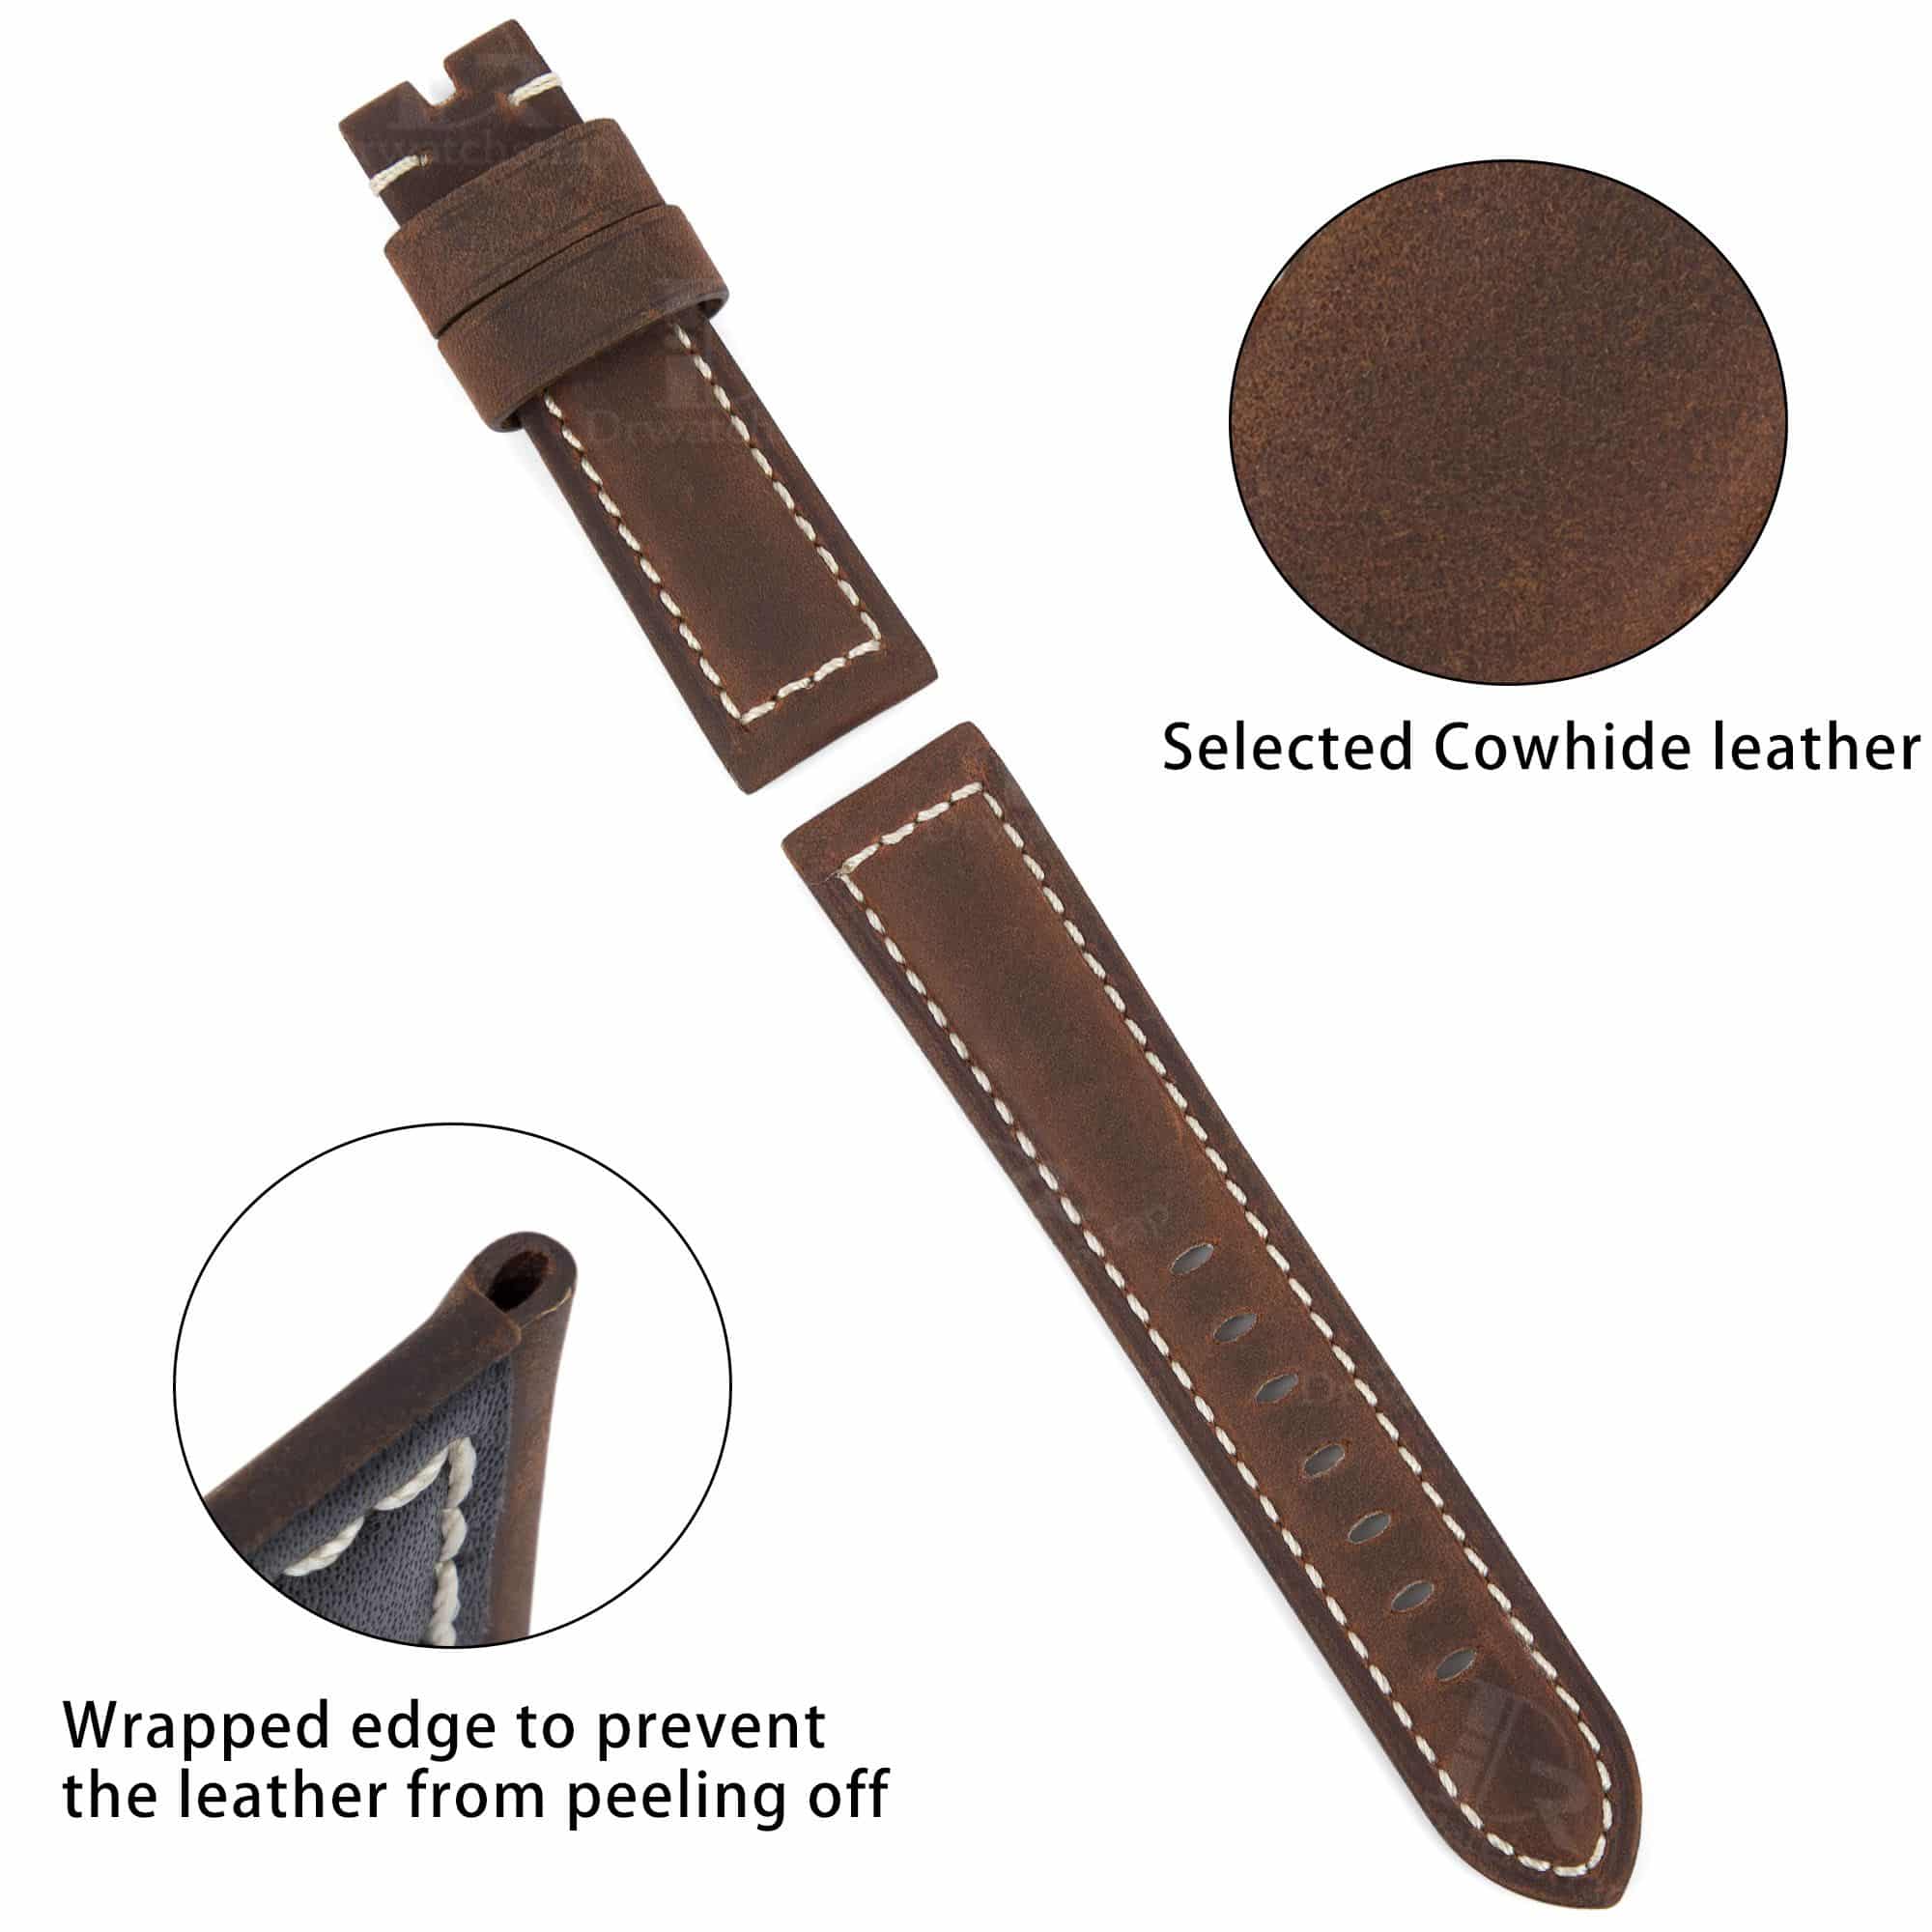 Best quality brown calfskin Panerai replacement strap 24mm 22mm 26mm & leather OEM Custom watch band for Panerai Luminor Due Radiomir watches from DR Watchstrap - Shop and buy calf leather handmade OEM straps and watch bands online at a low price